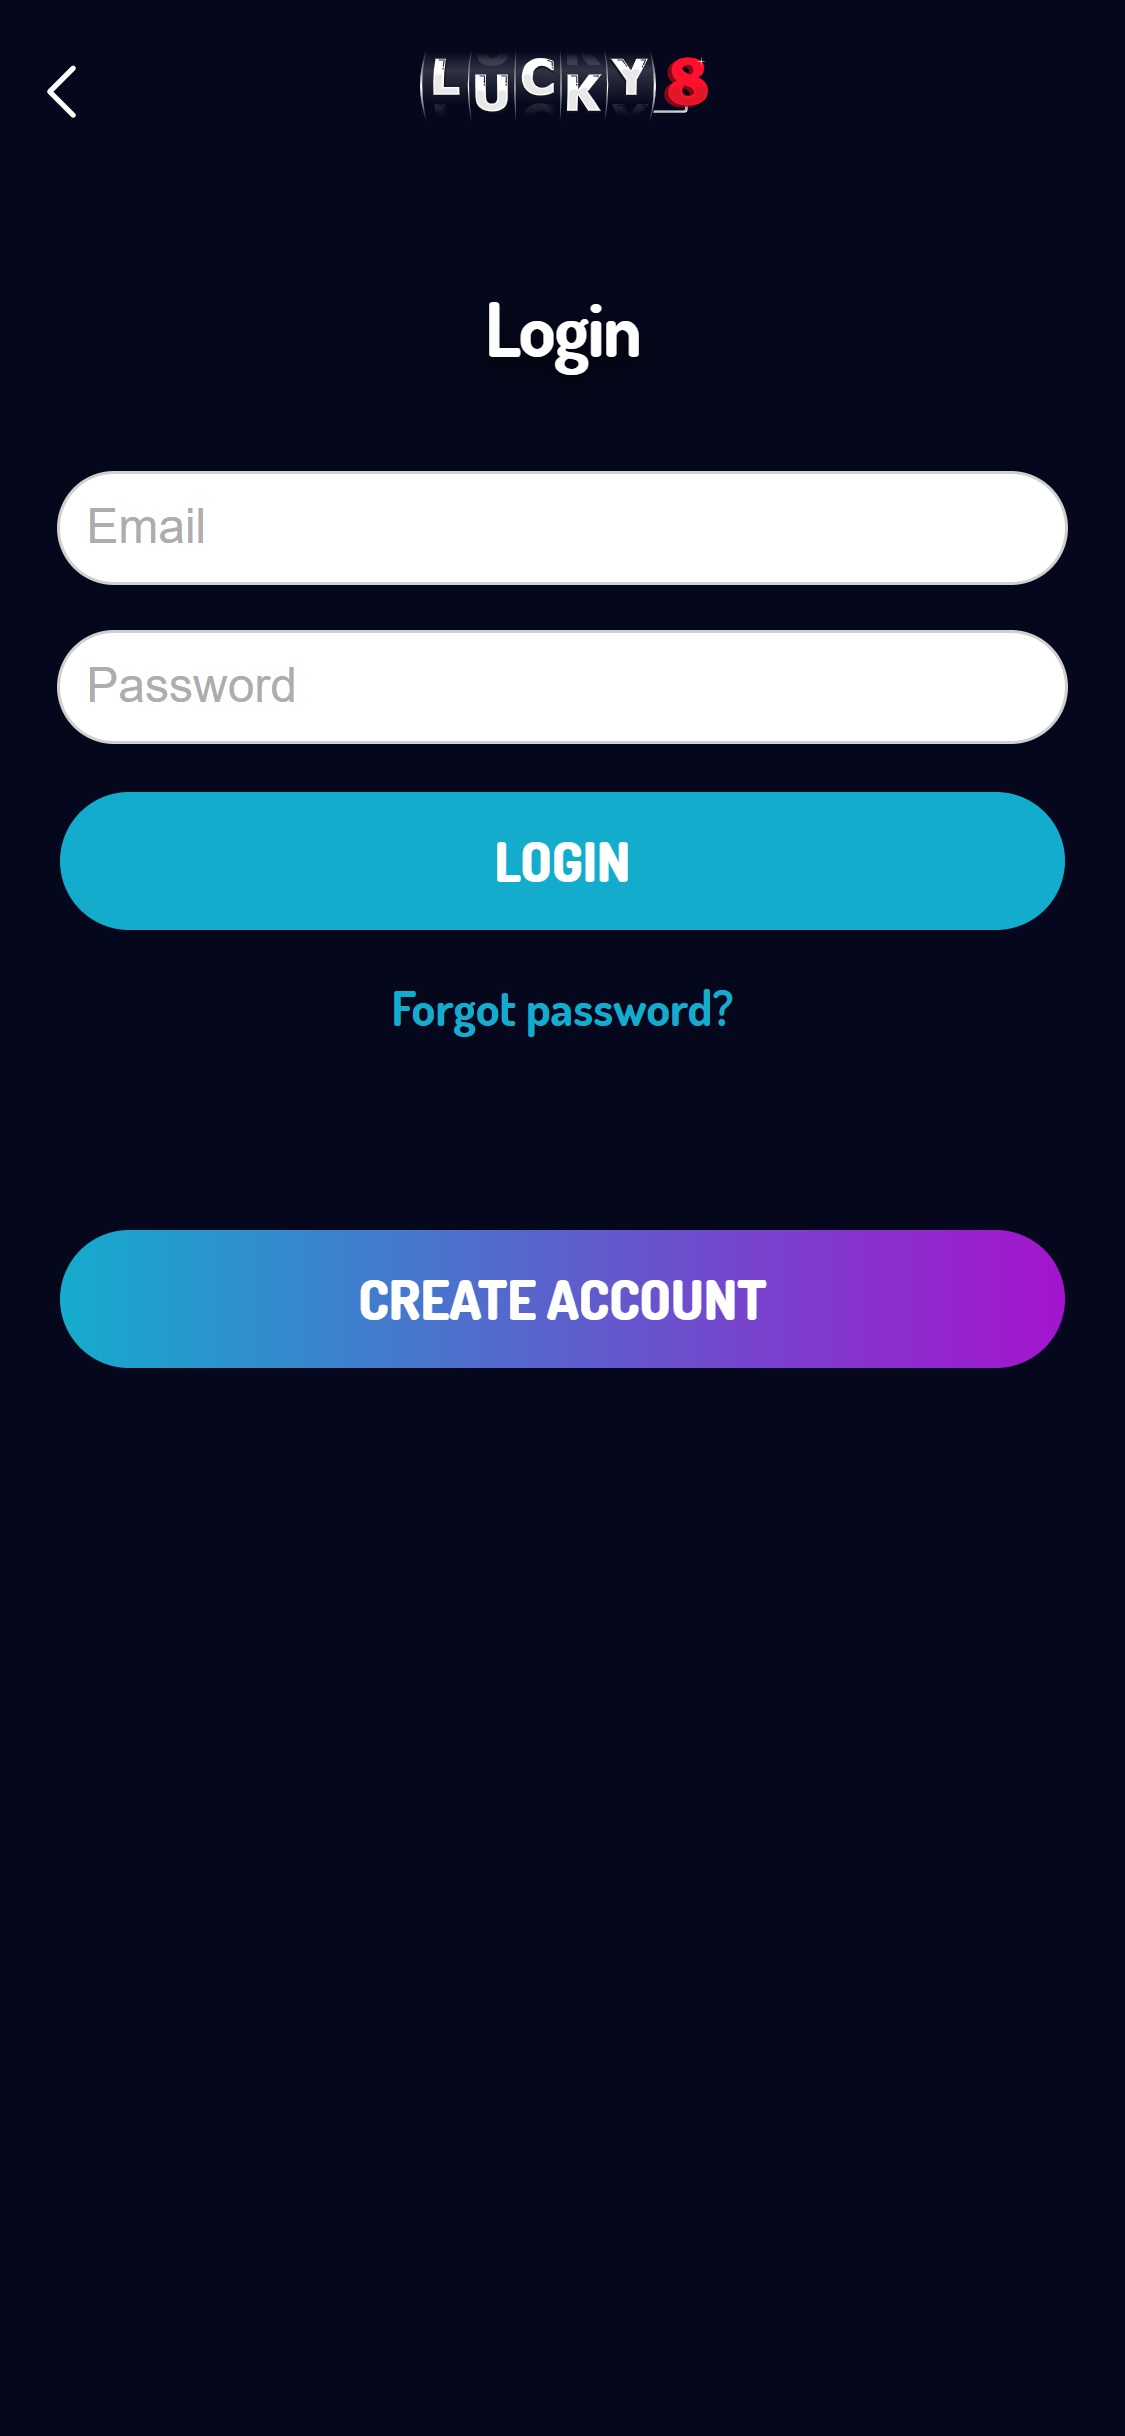 Lucky8 Casino Mobile Login Review